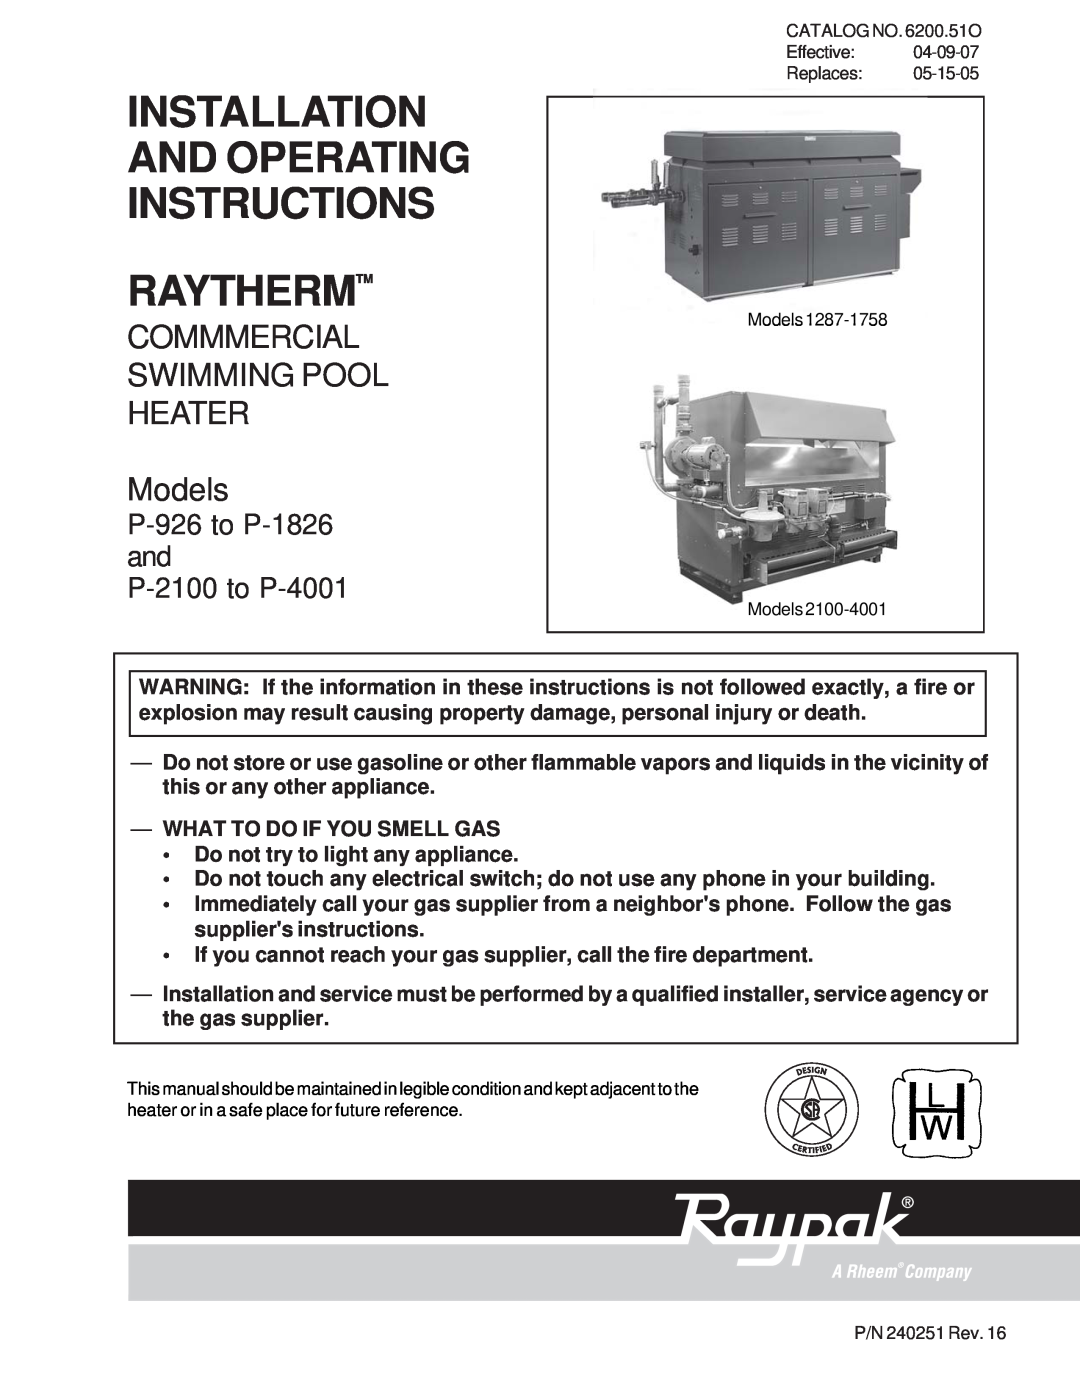 Raypak P-926, P-1826, P-2100, P-4001, 1287-1758, 2100-4001 manual Installation And Operating Instructions Raythermtm 